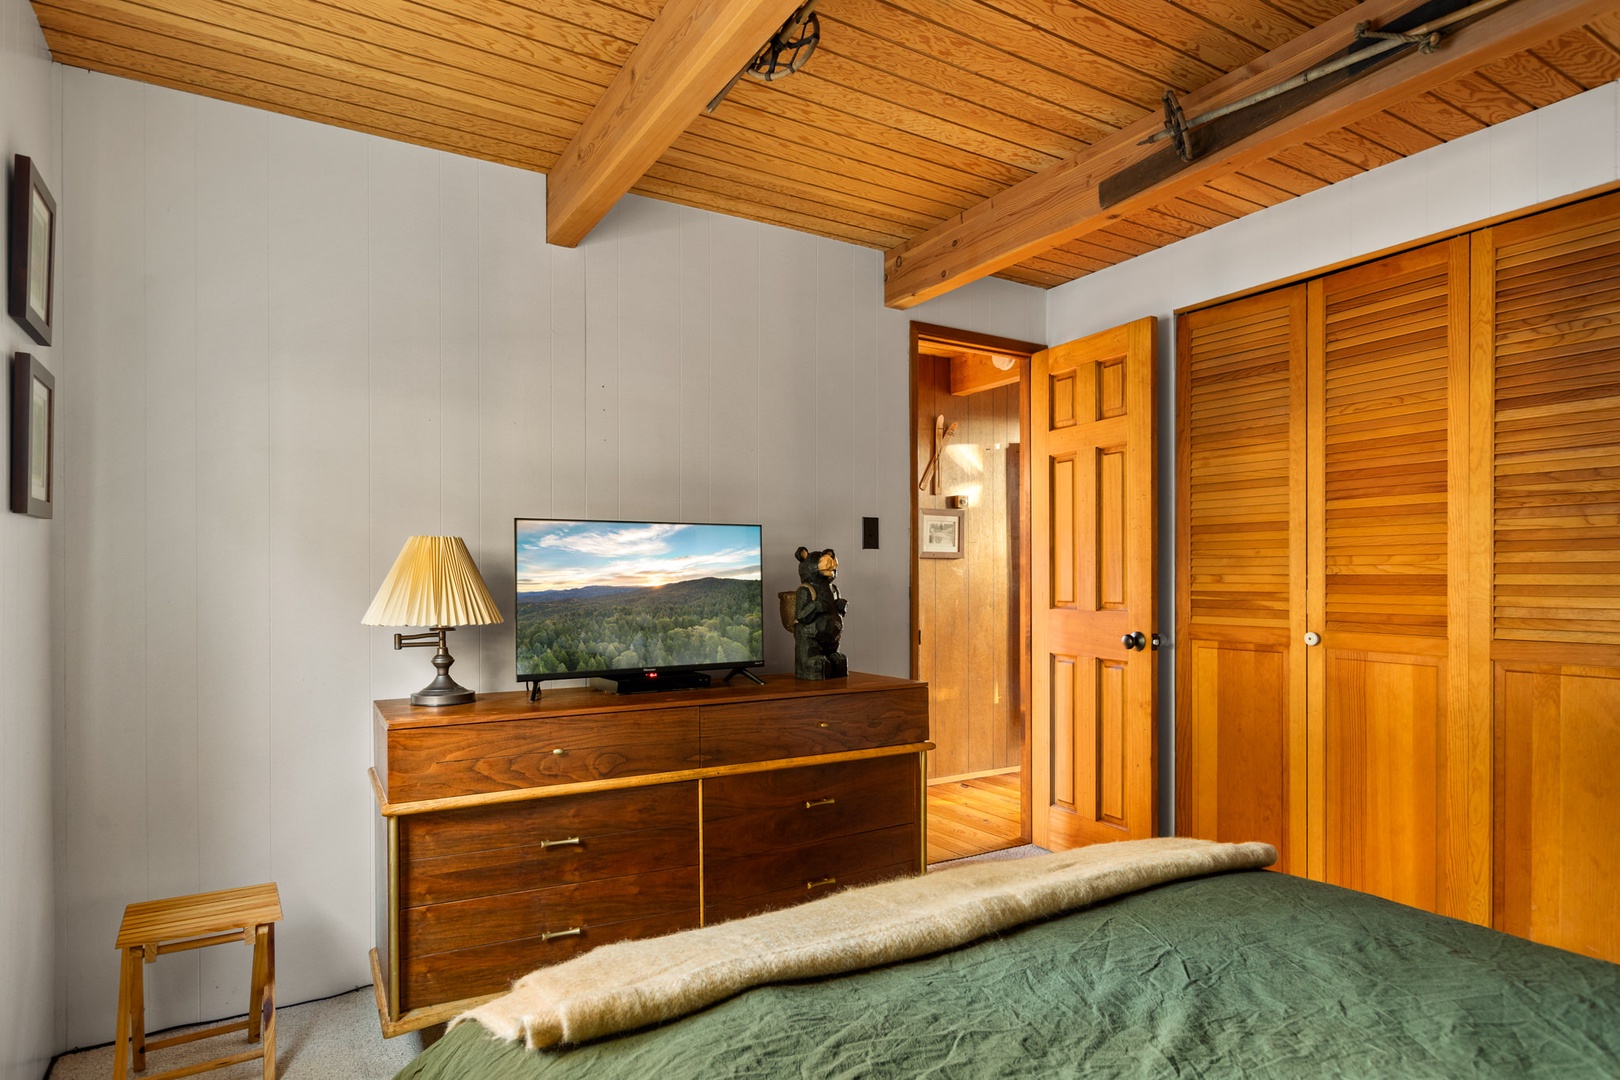 This main level bedroom retreat offers a full bed & Smart TV